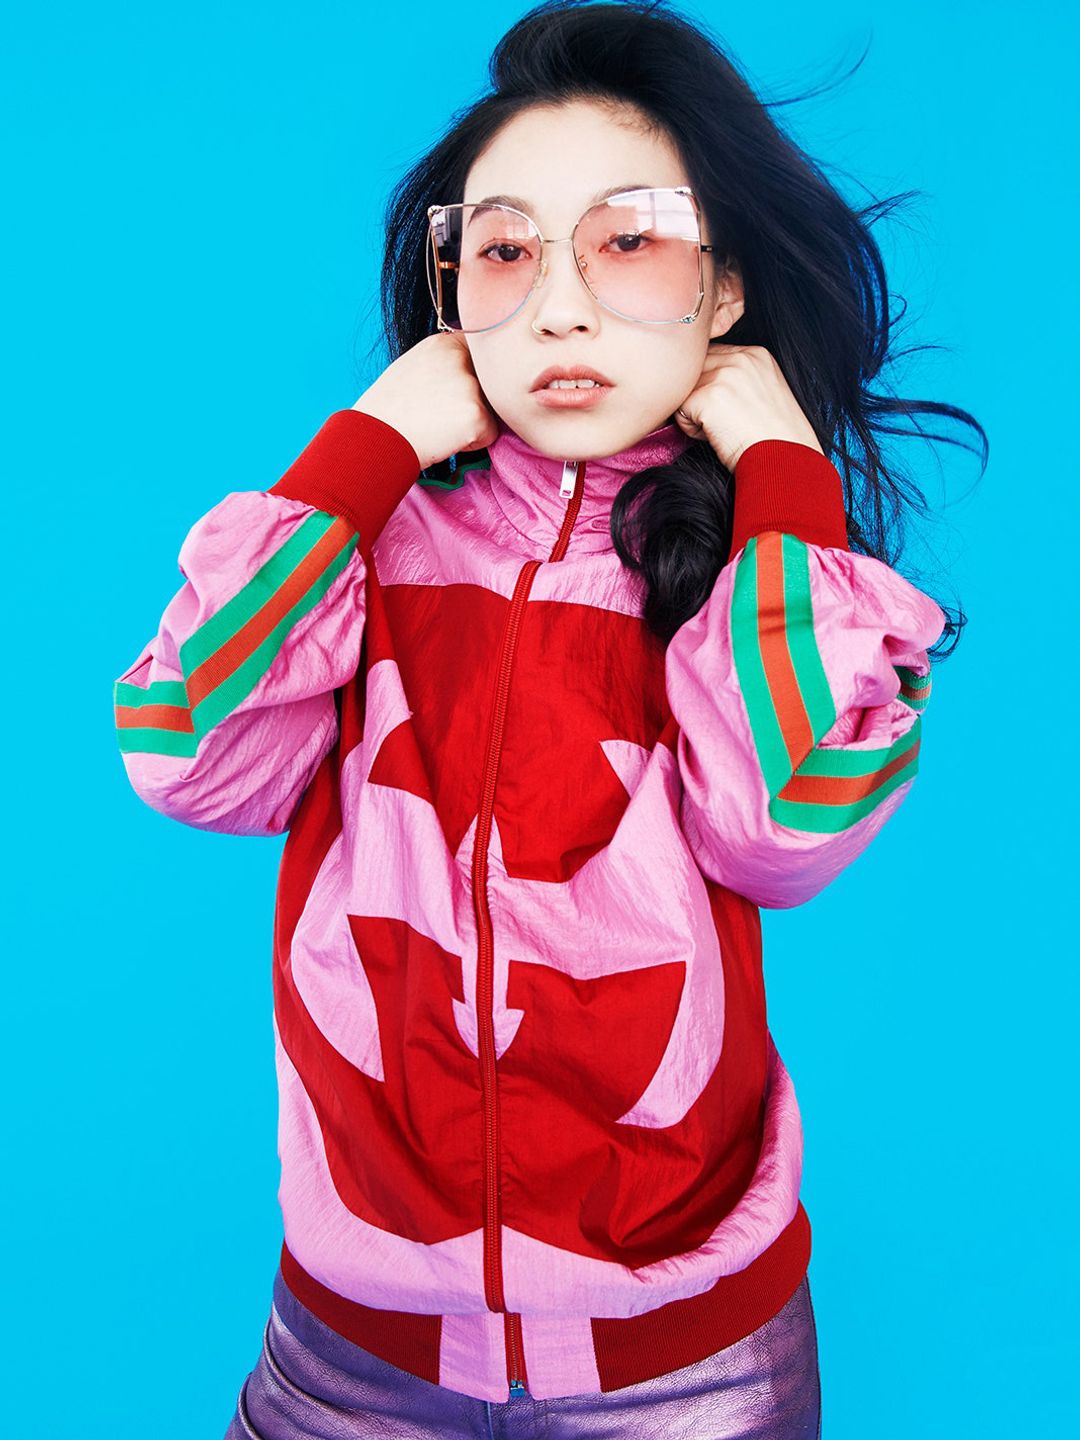 Awkwafina who are her parents